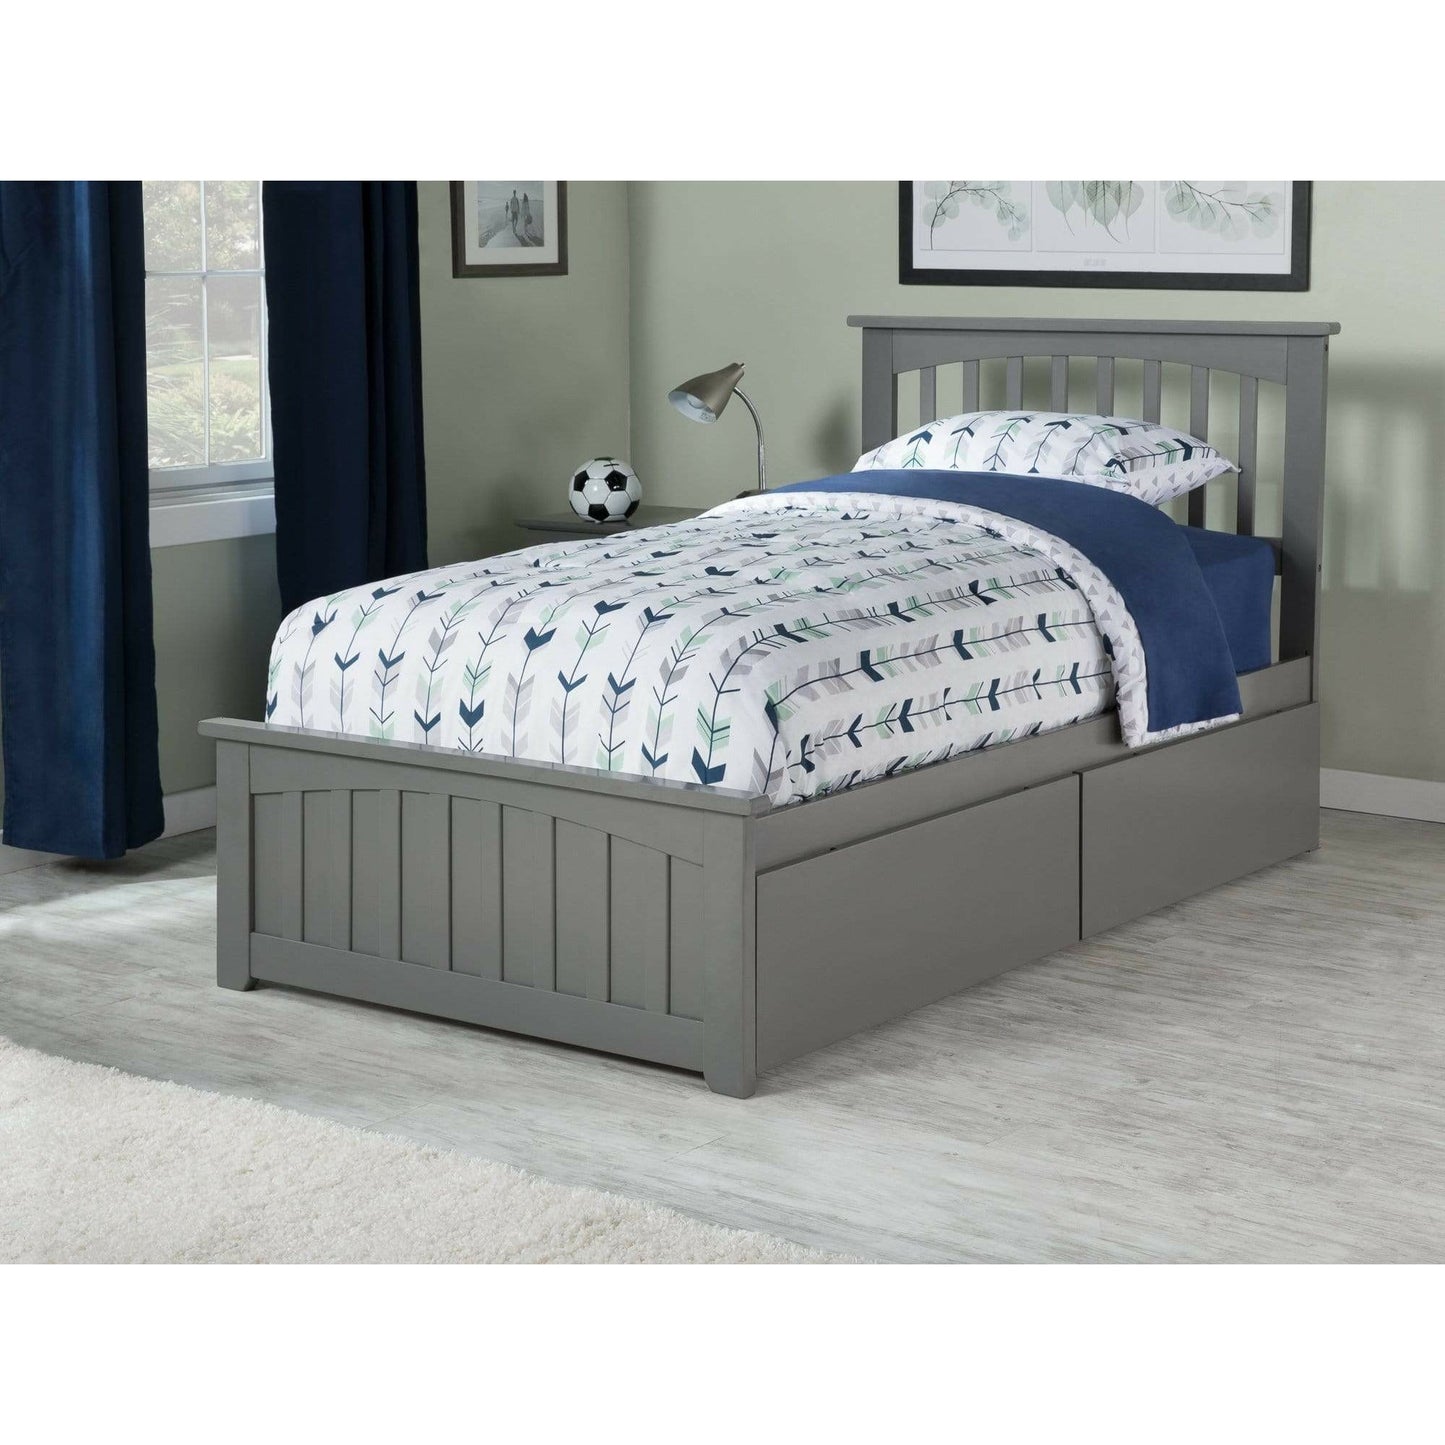 Atlantic Furniture Bed Grey Mission Twin XL Platform Bed with Matching Foot Board with 2 Urban Bed Drawers in White